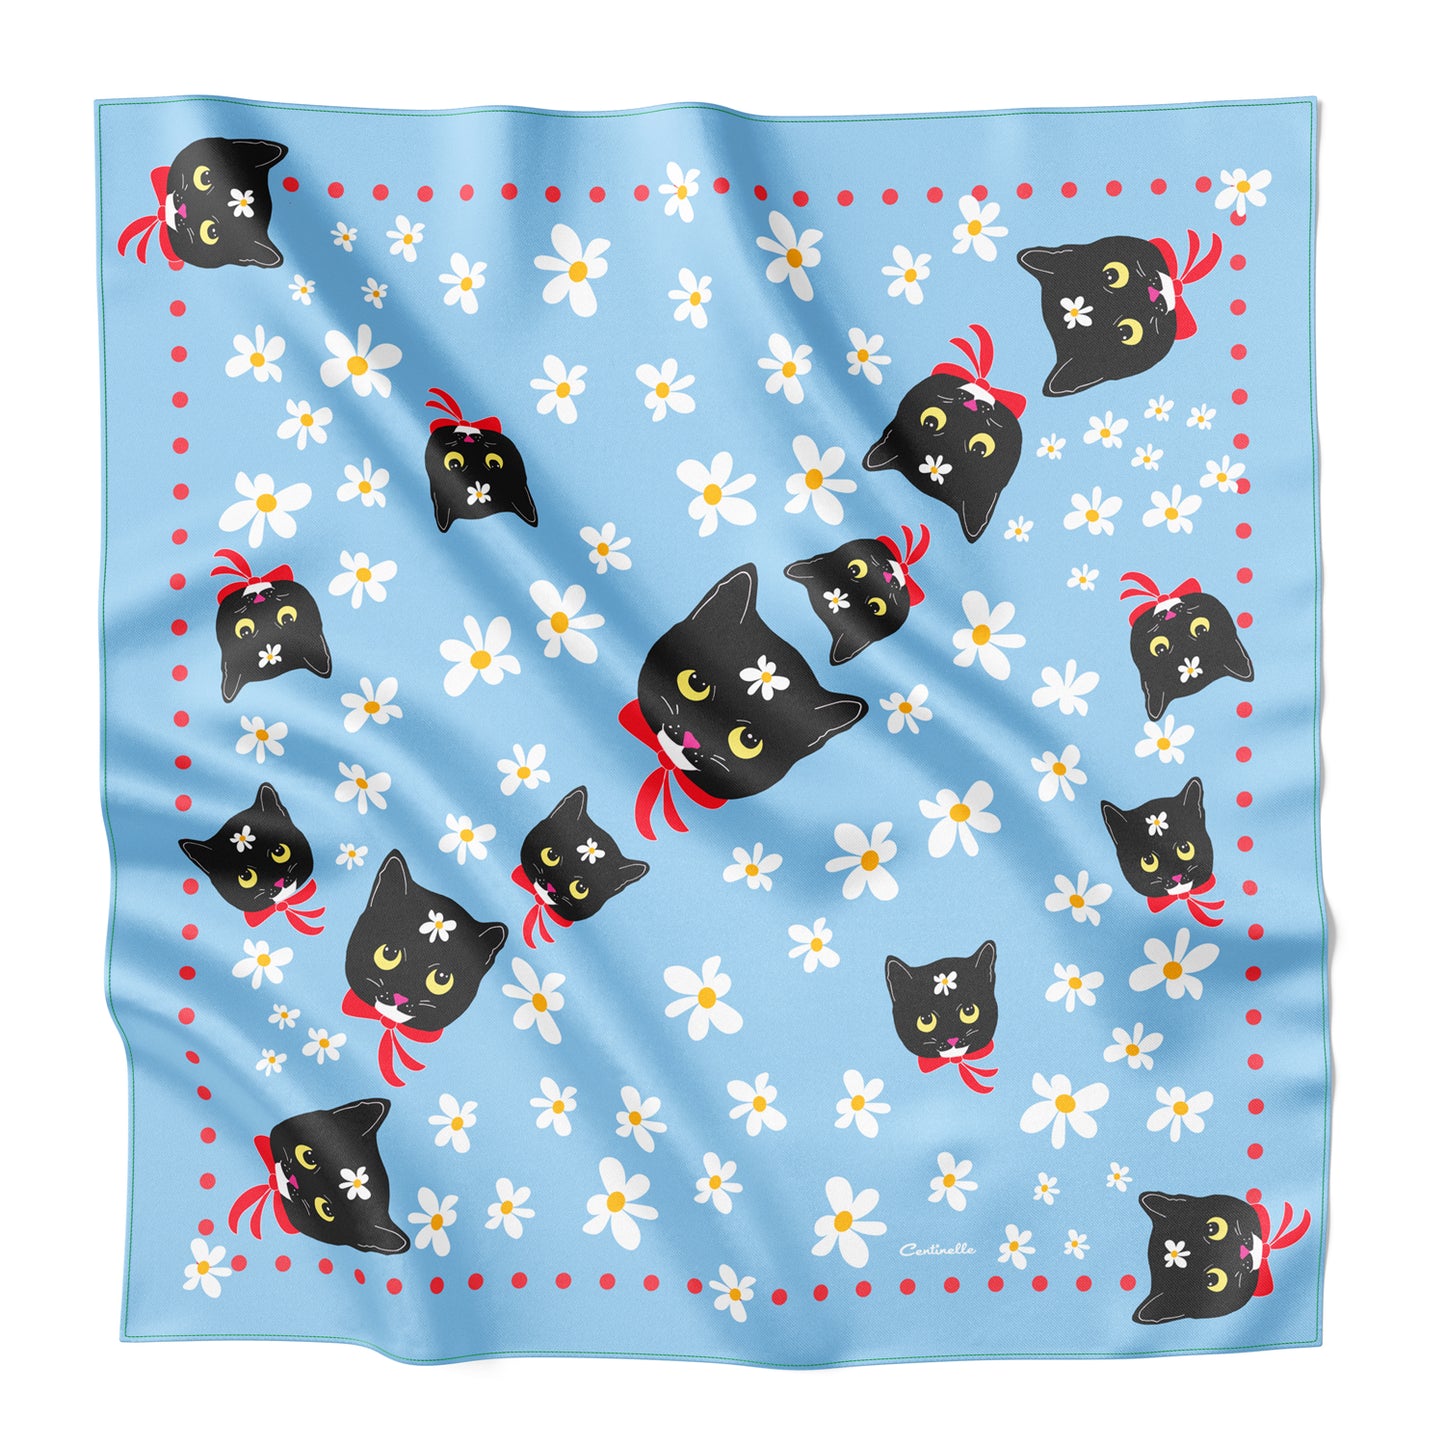 Blue silk bandana with black cats and white daisies. 